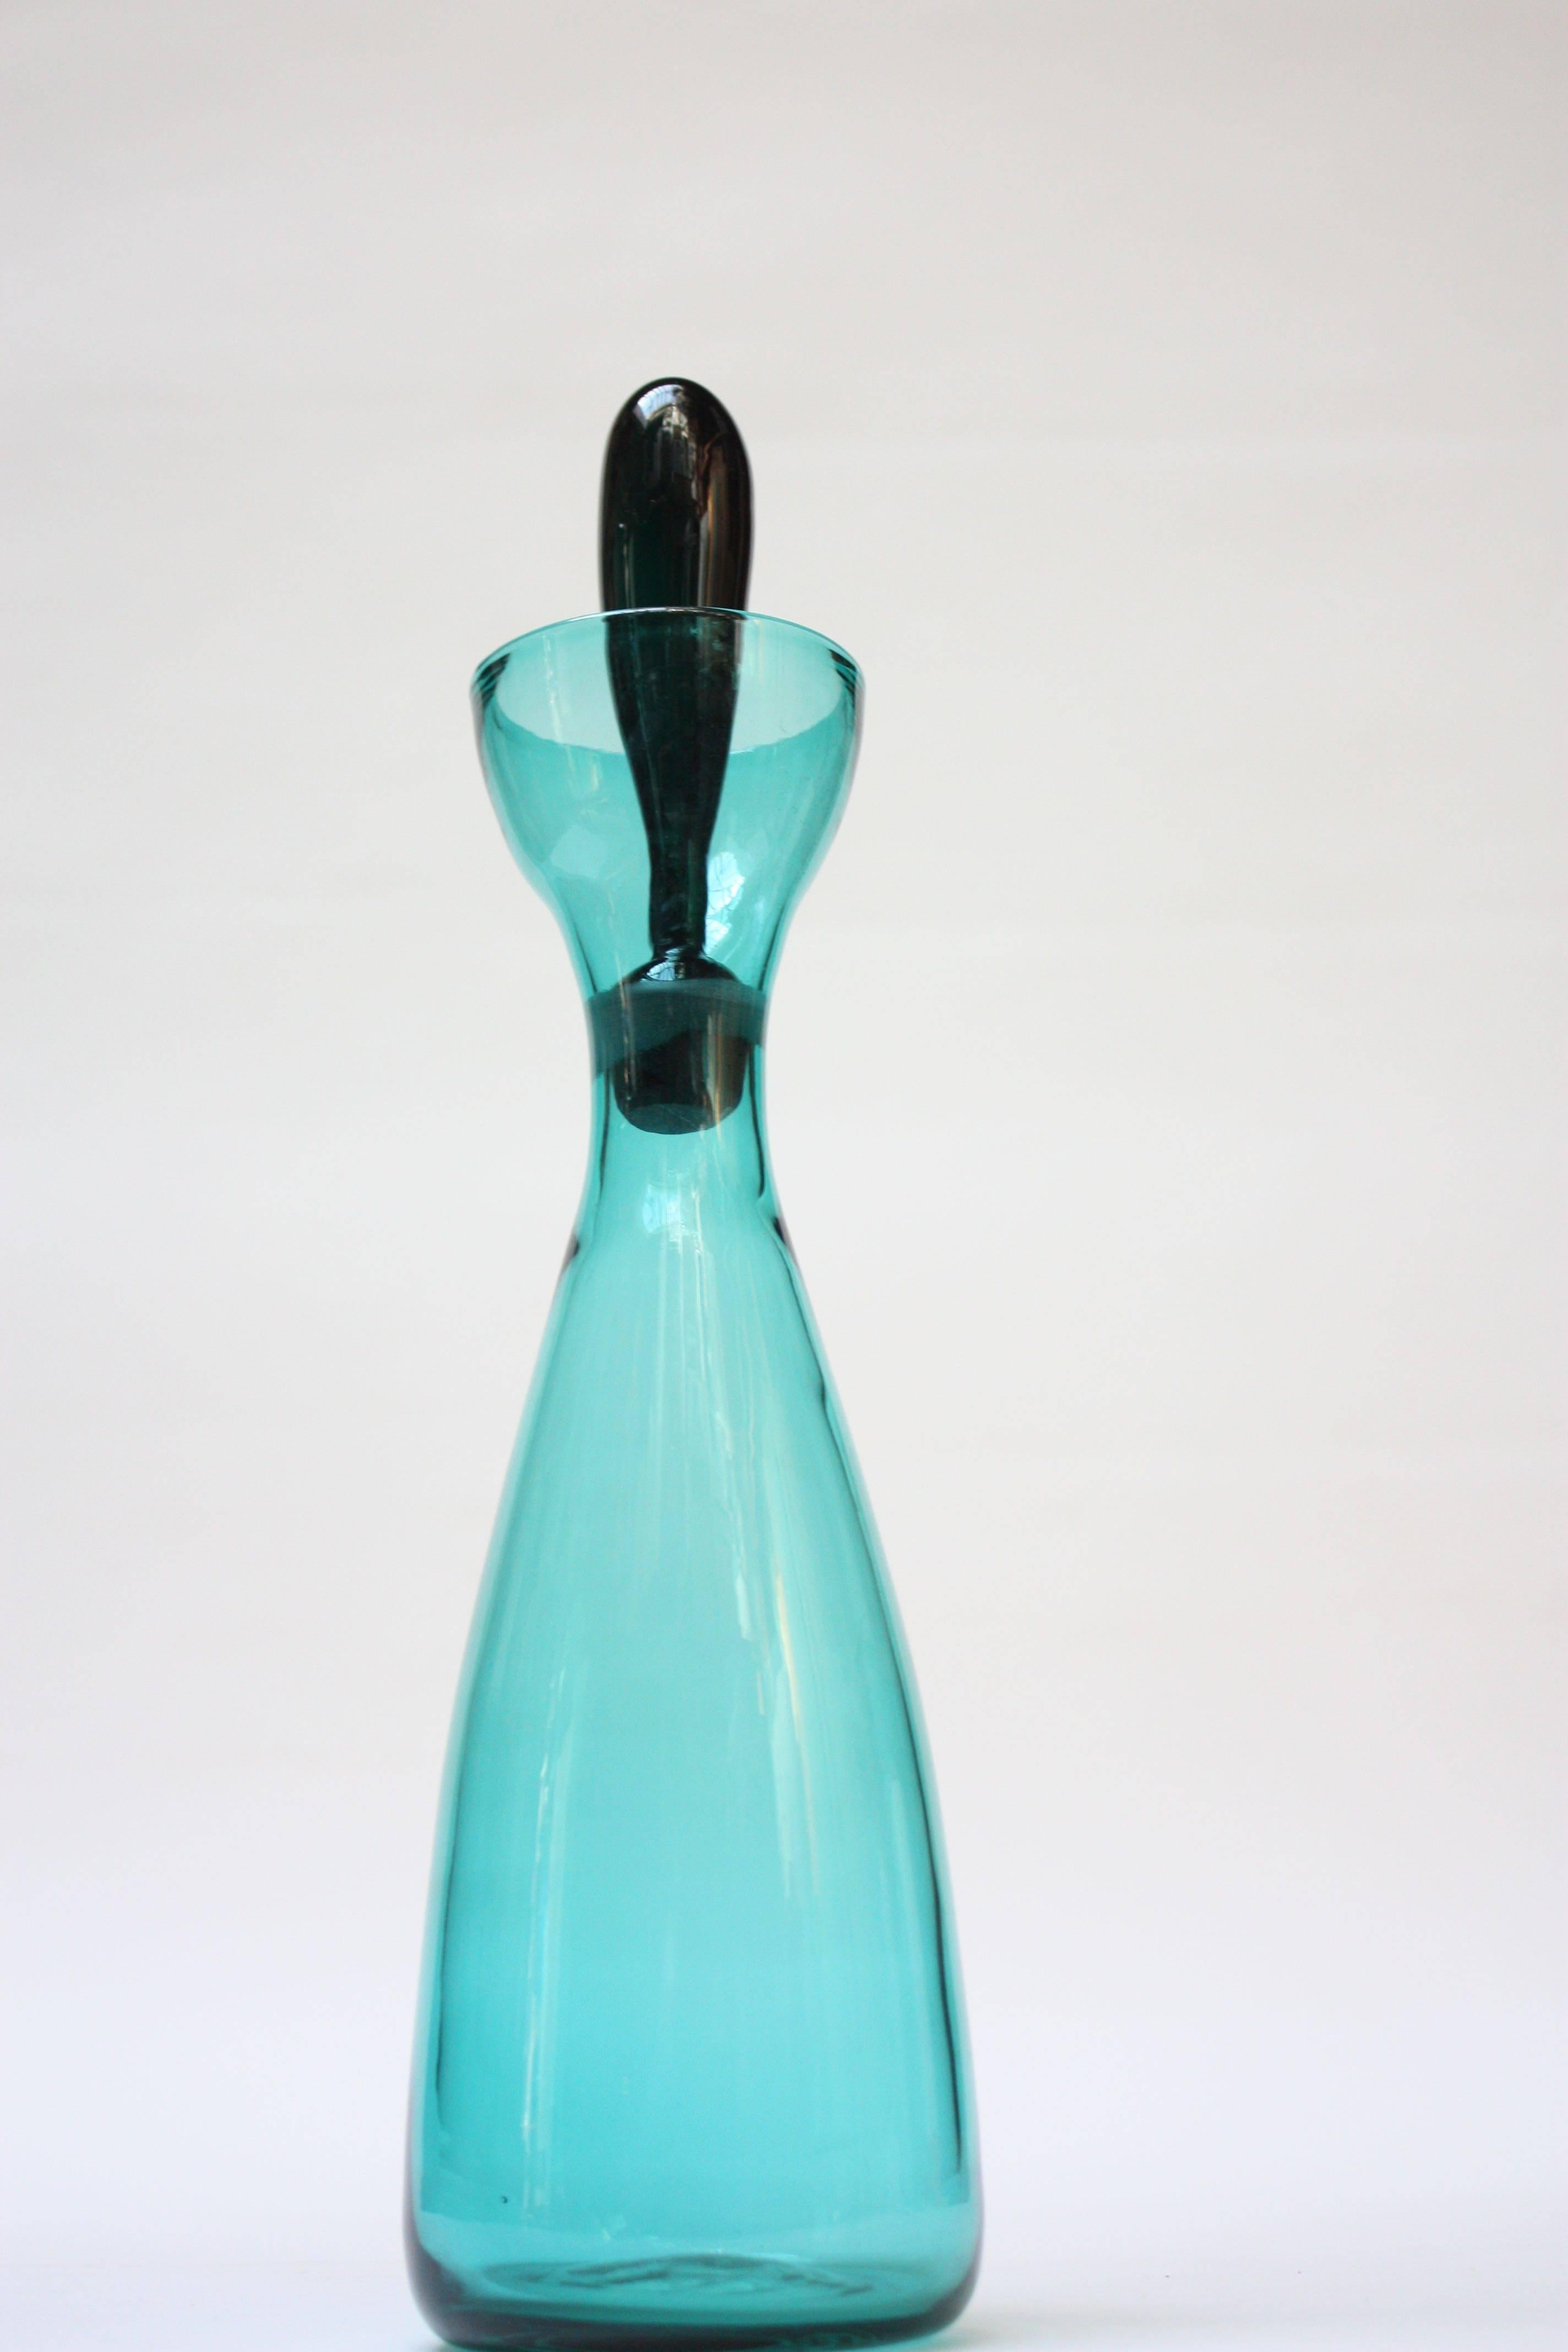 This is a rare example of the Blenko #564 Decanter designed by Wayne Husted in 1956. The teal decanter is offset with its emerald green stopper and creates a nice contrast in color. The piece is in excellent, vintage condition; there is only a